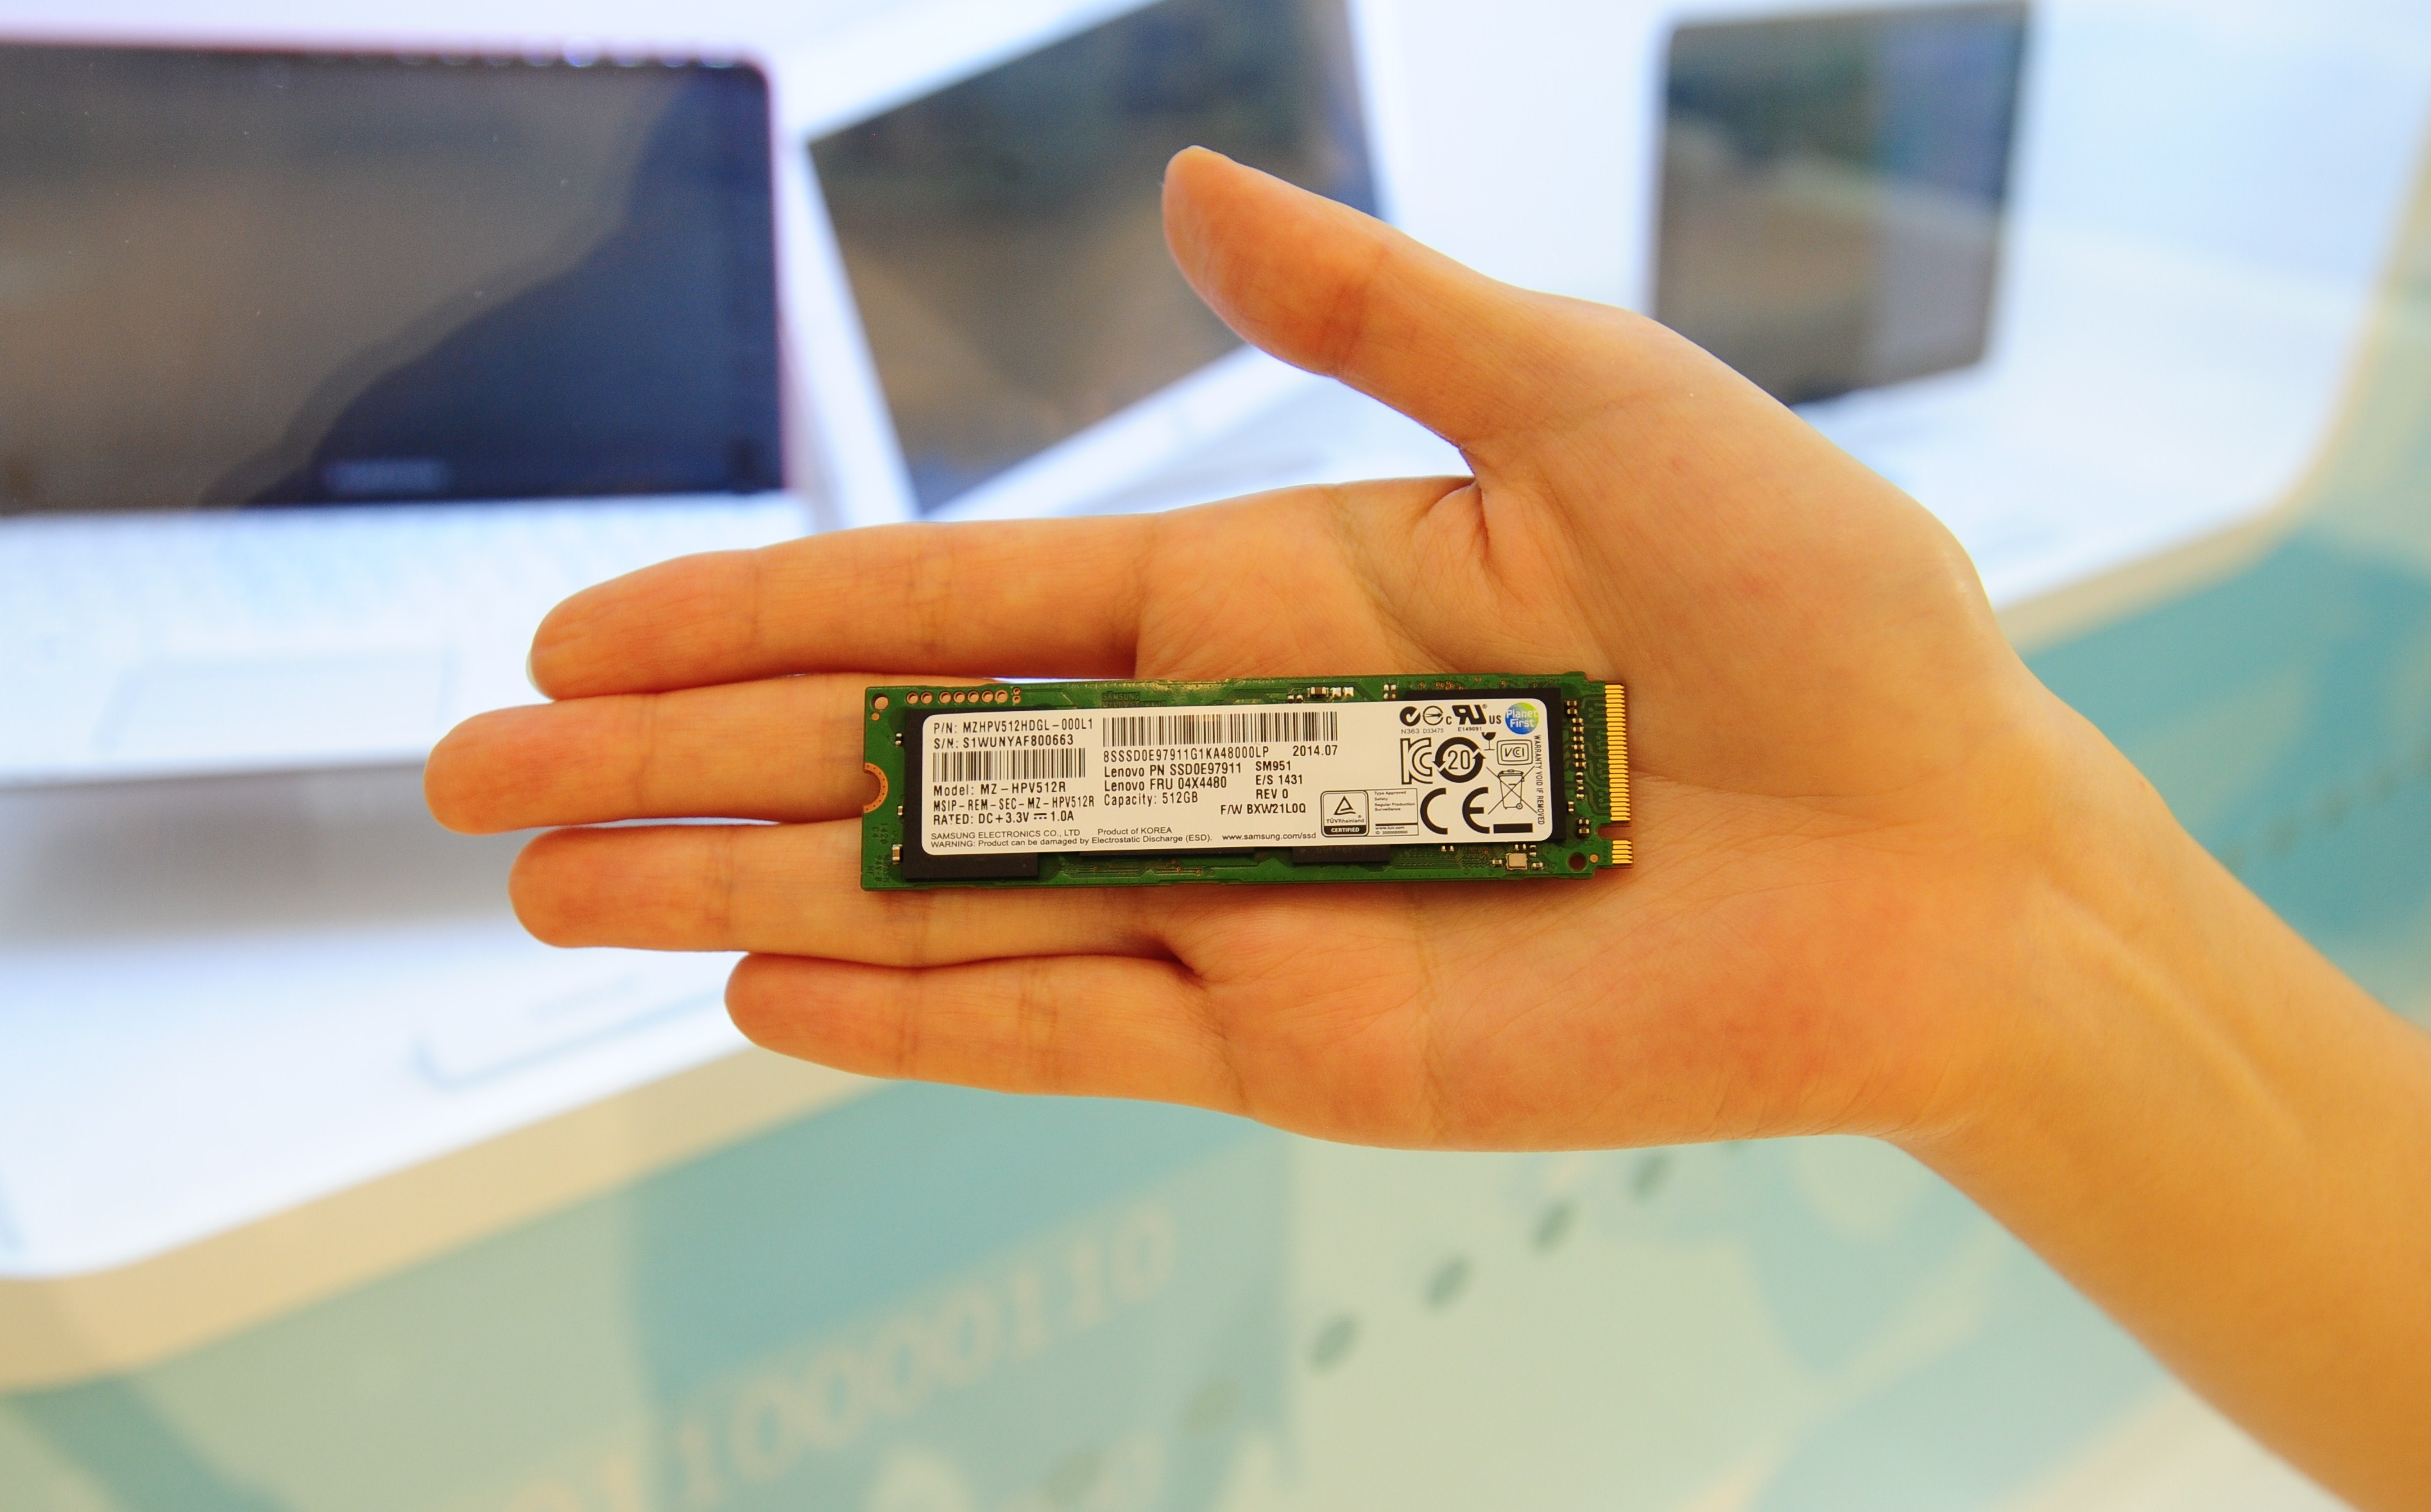 Samsung Electronics Now Mass Producing an Extremely Fast, Low-powered PCIe  SSD for Today's Notebook PCs